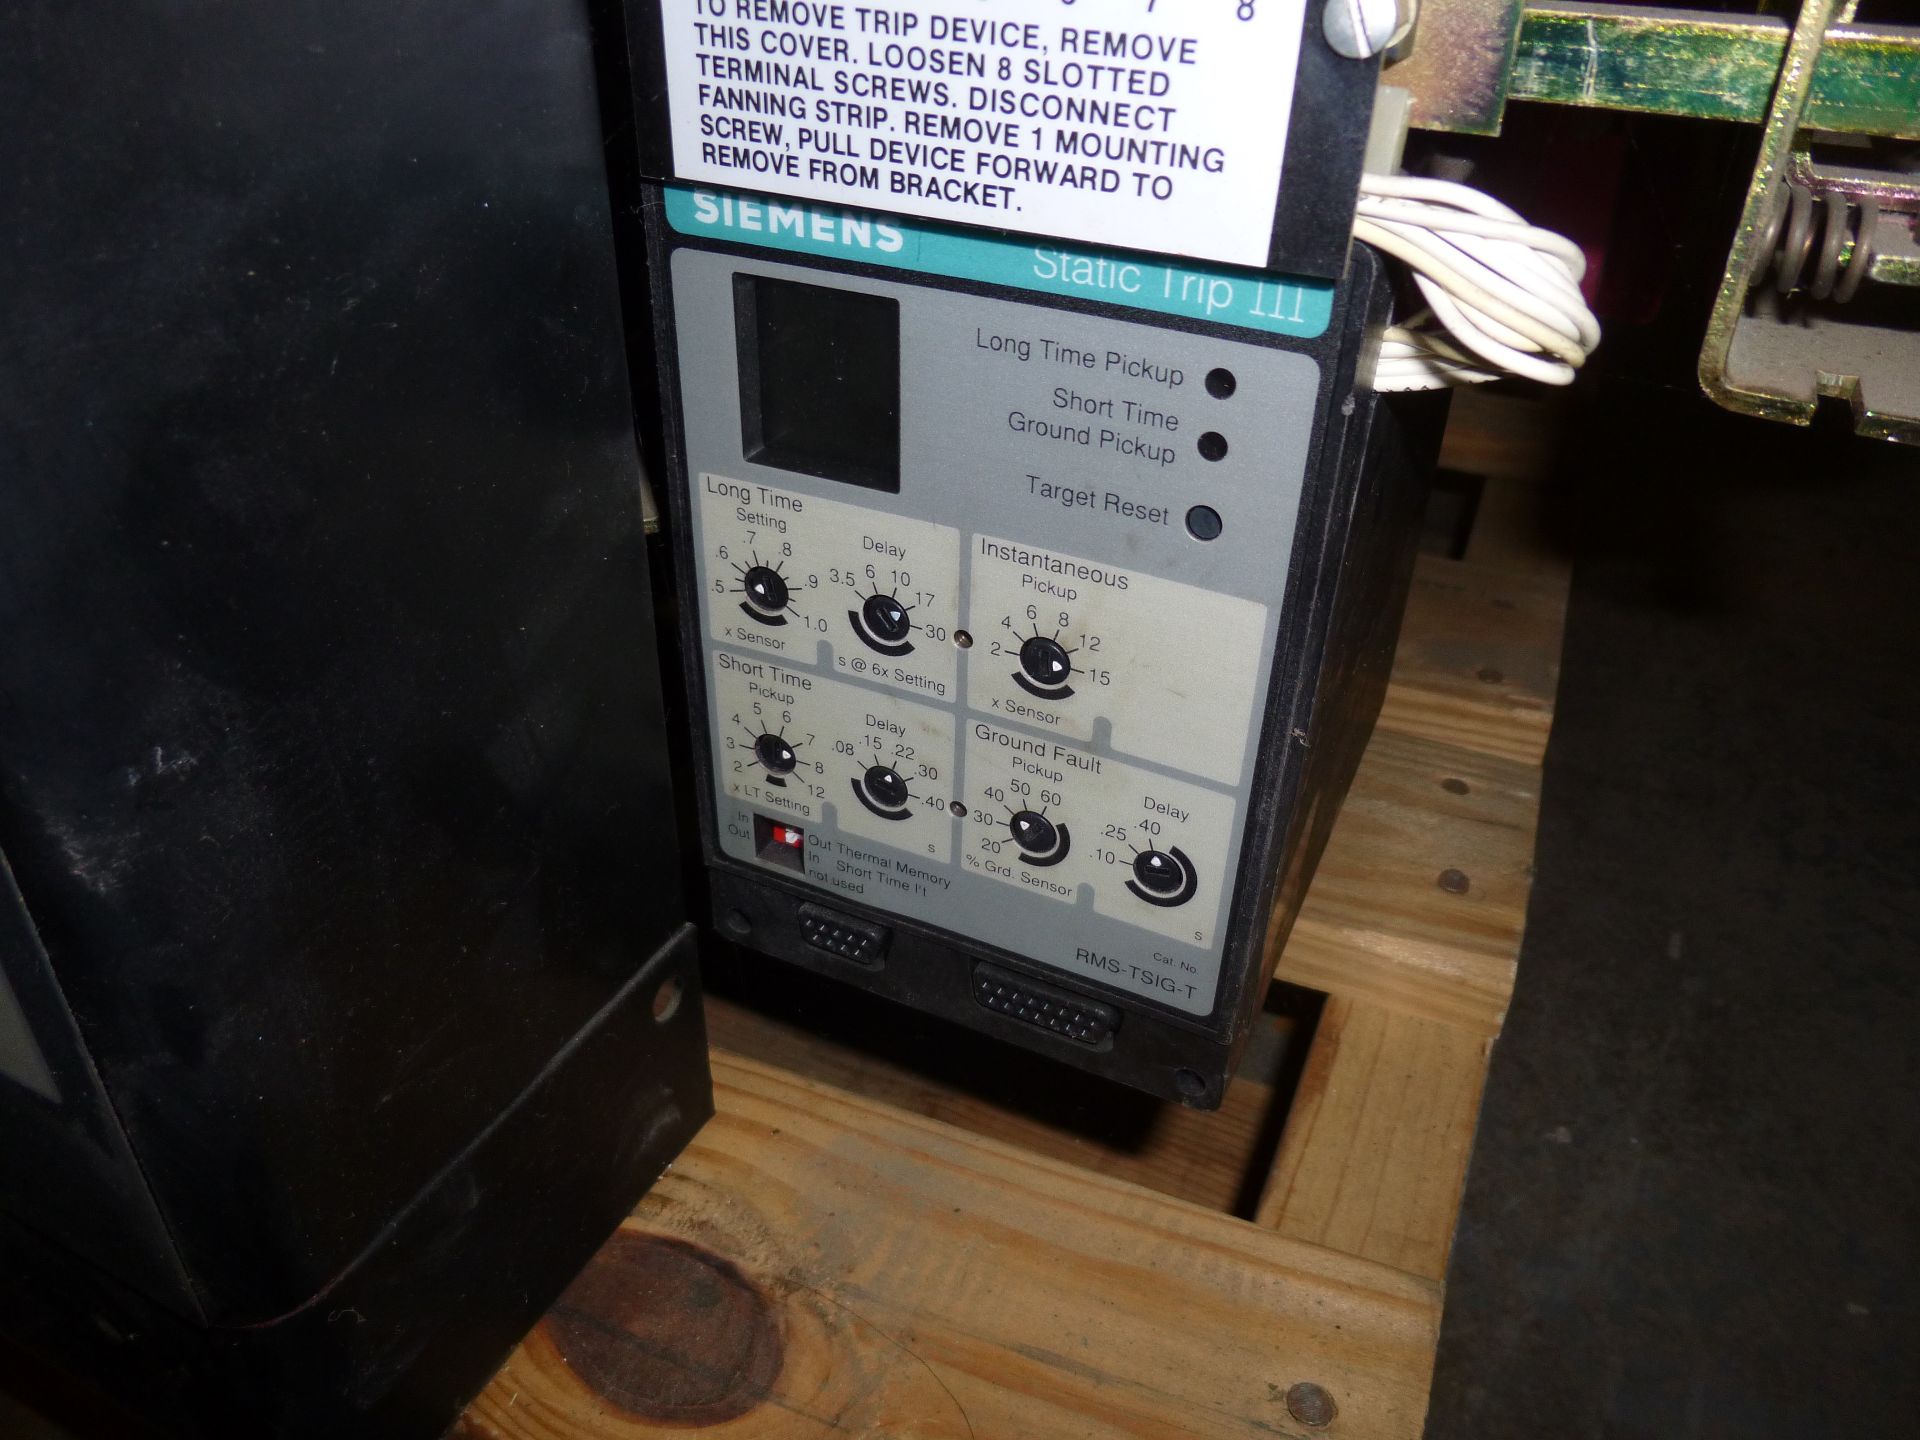 Siemens RLX-800 circuit breaker, 635v max, 800amp frame size with static trip III monitor - Image 6 of 6